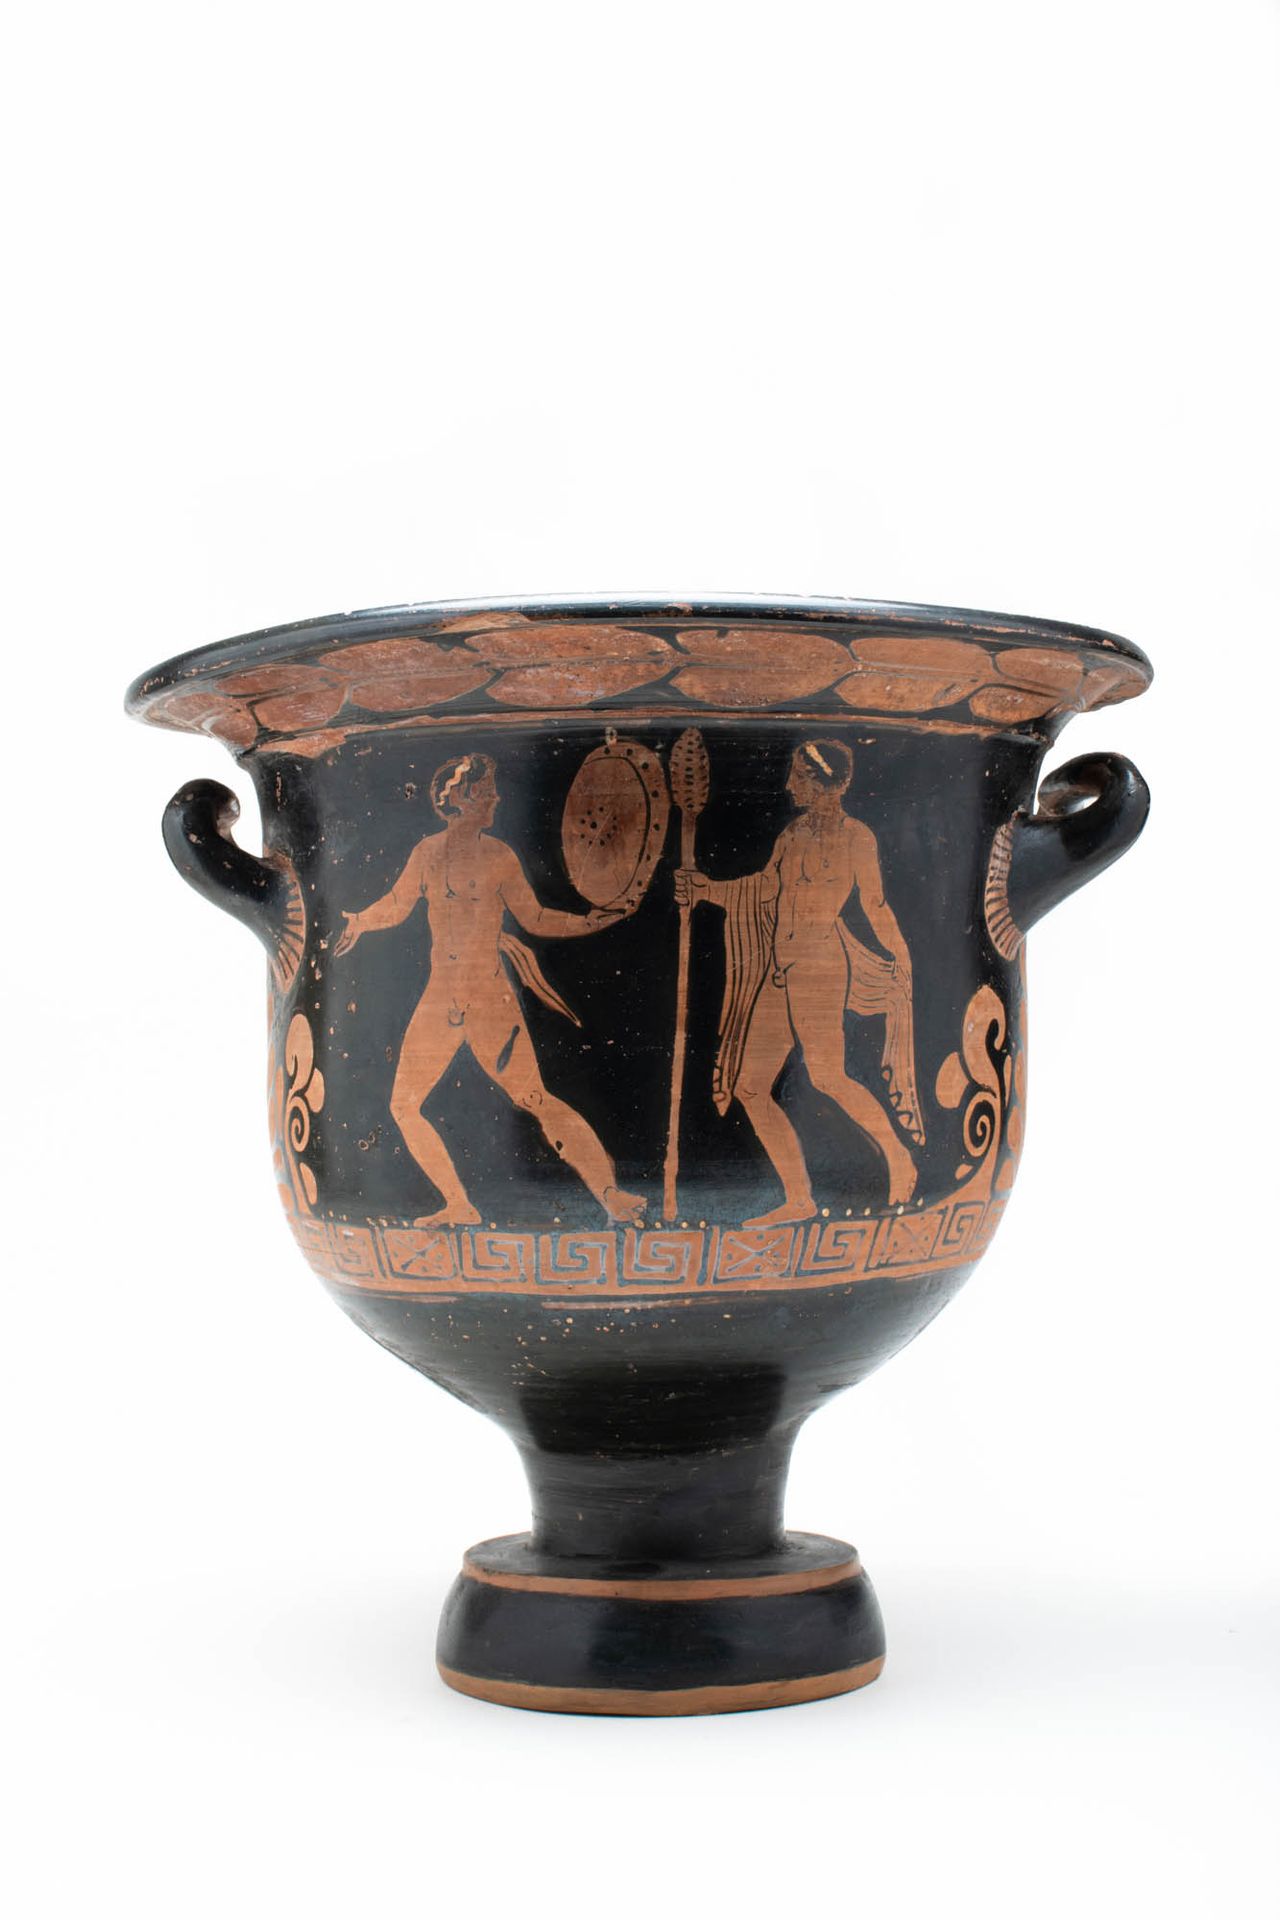 APULIAN RED-FIGURE BELL KRATER WITH SATYR AND DIONYSUS Ca. 390 AV.
Un krater à c&hellip;